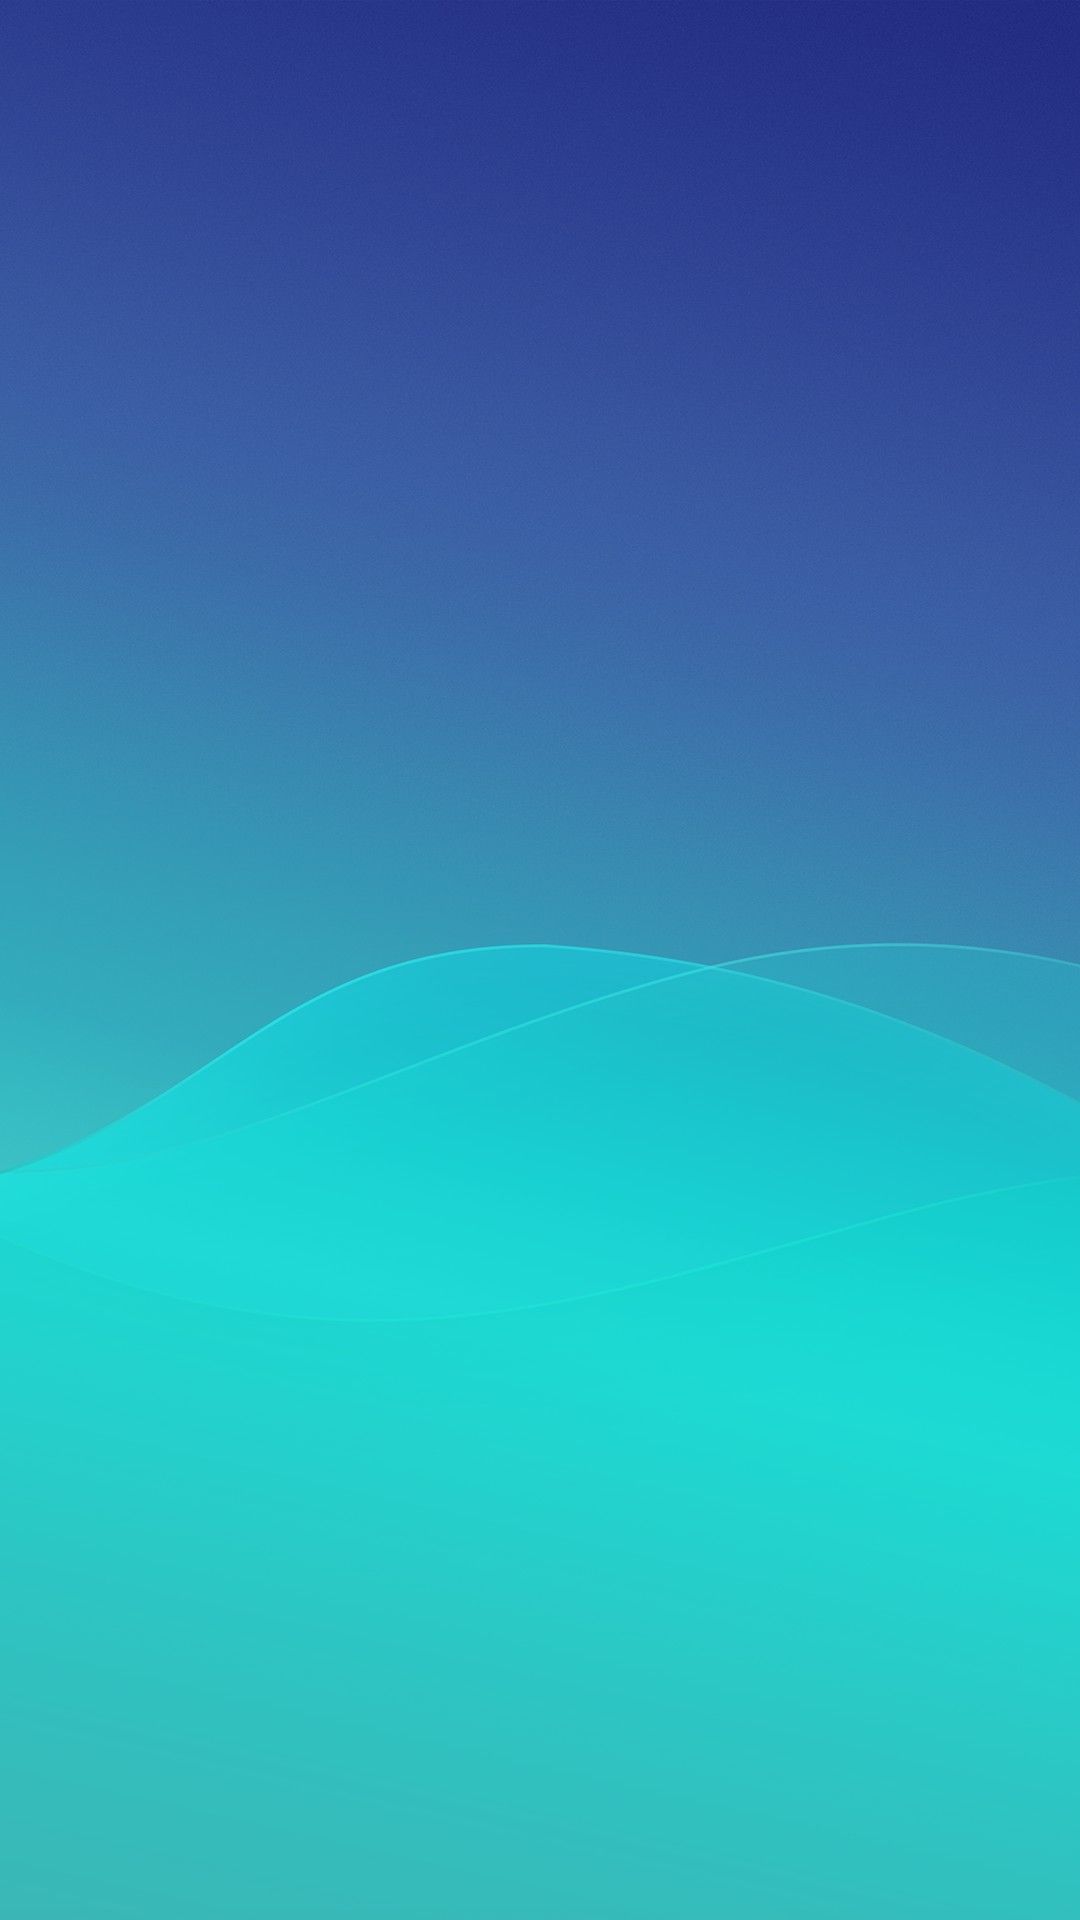 Minimal Abstract Blue Waves iPhone Wallpaper. Best